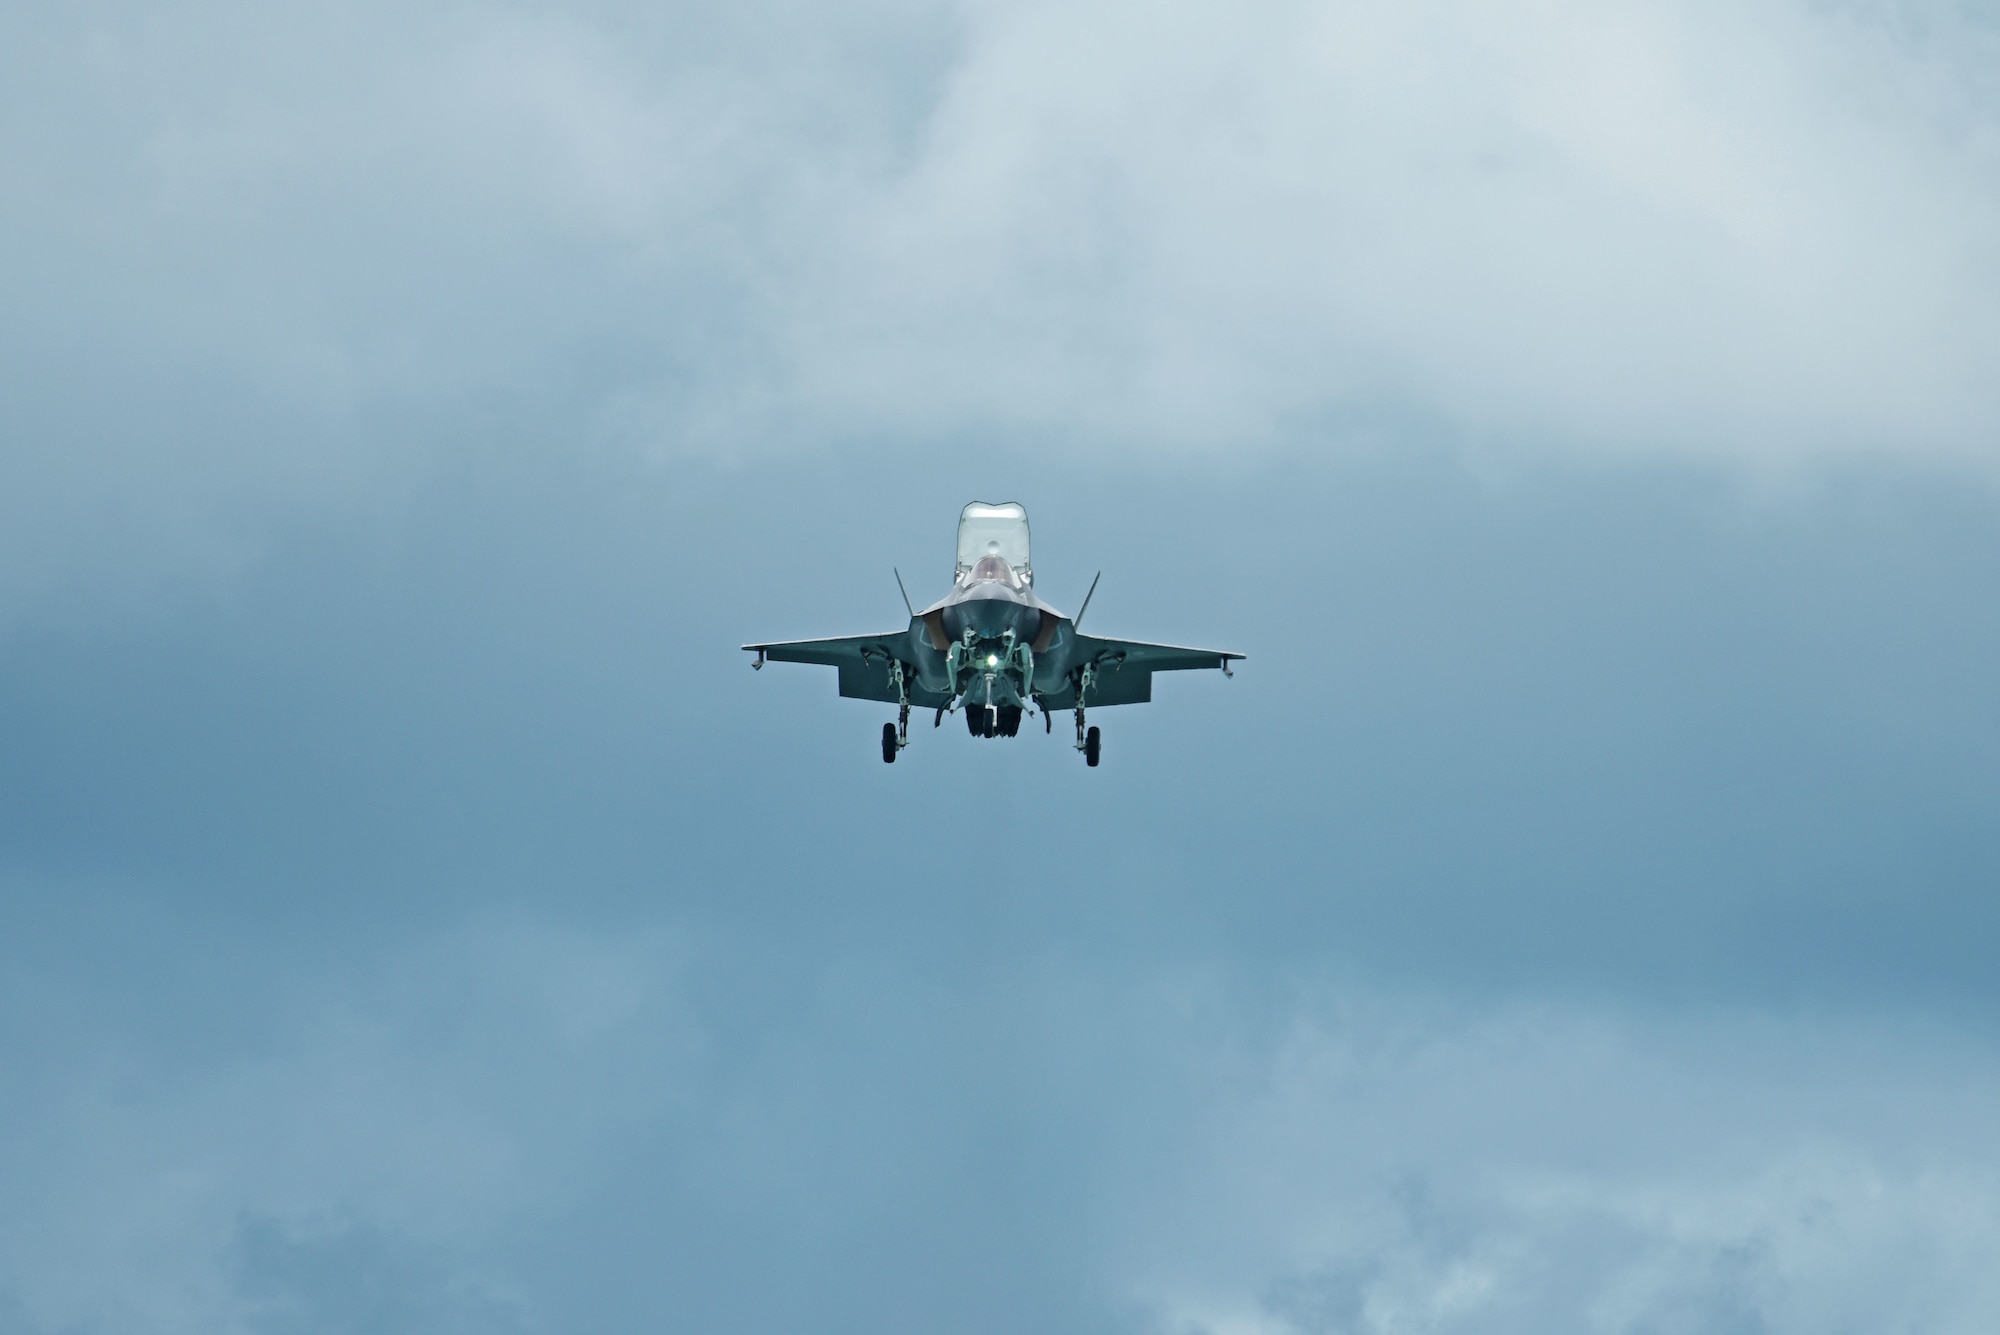 An F-35B Lightning II performs hover maneuvers at the Singapore Airshow